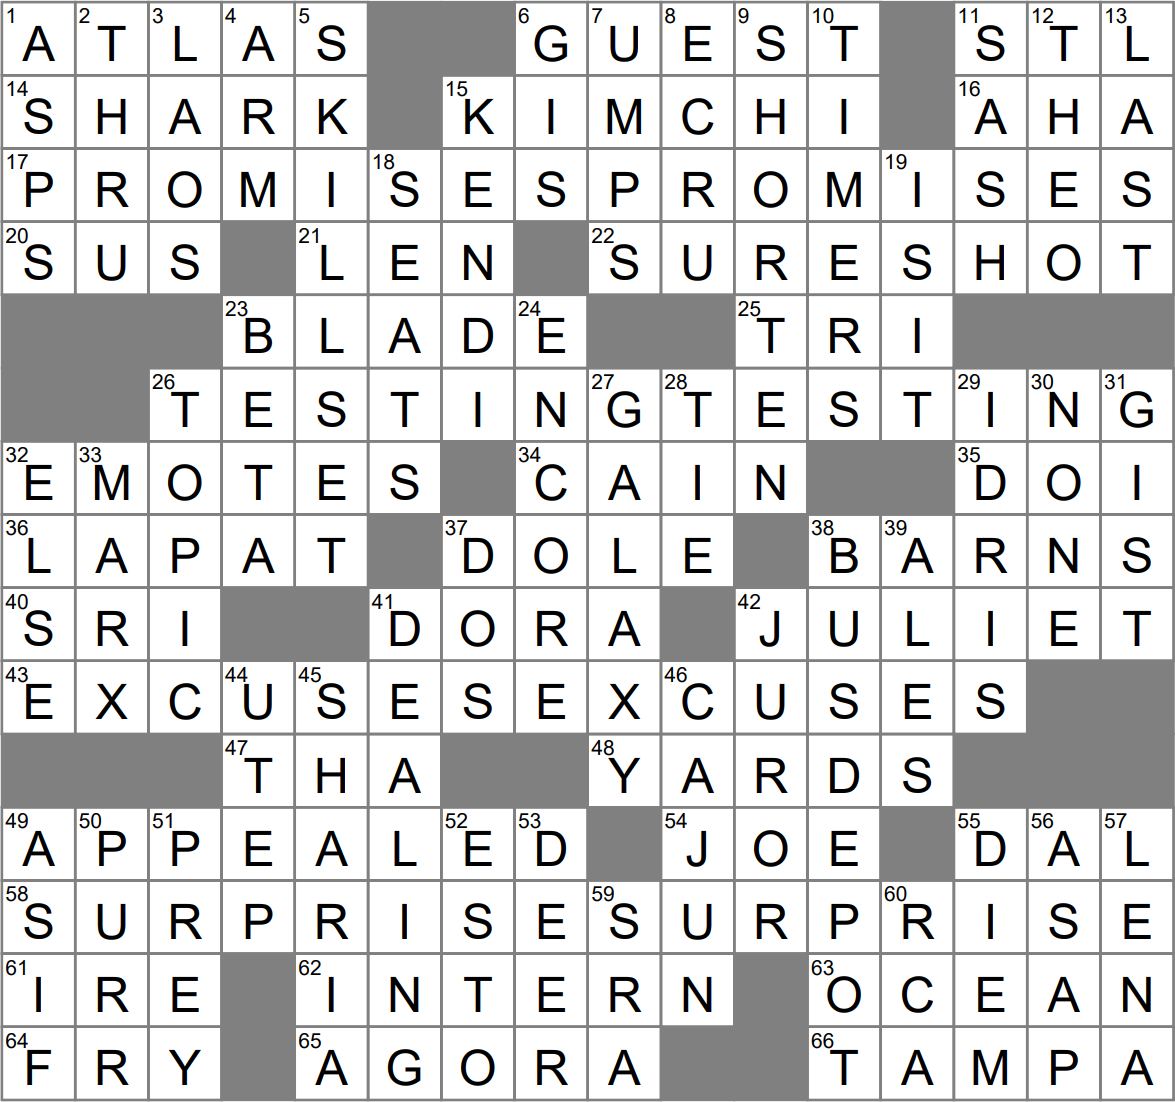 All one can do crossword clue Archives LAXCrossword com